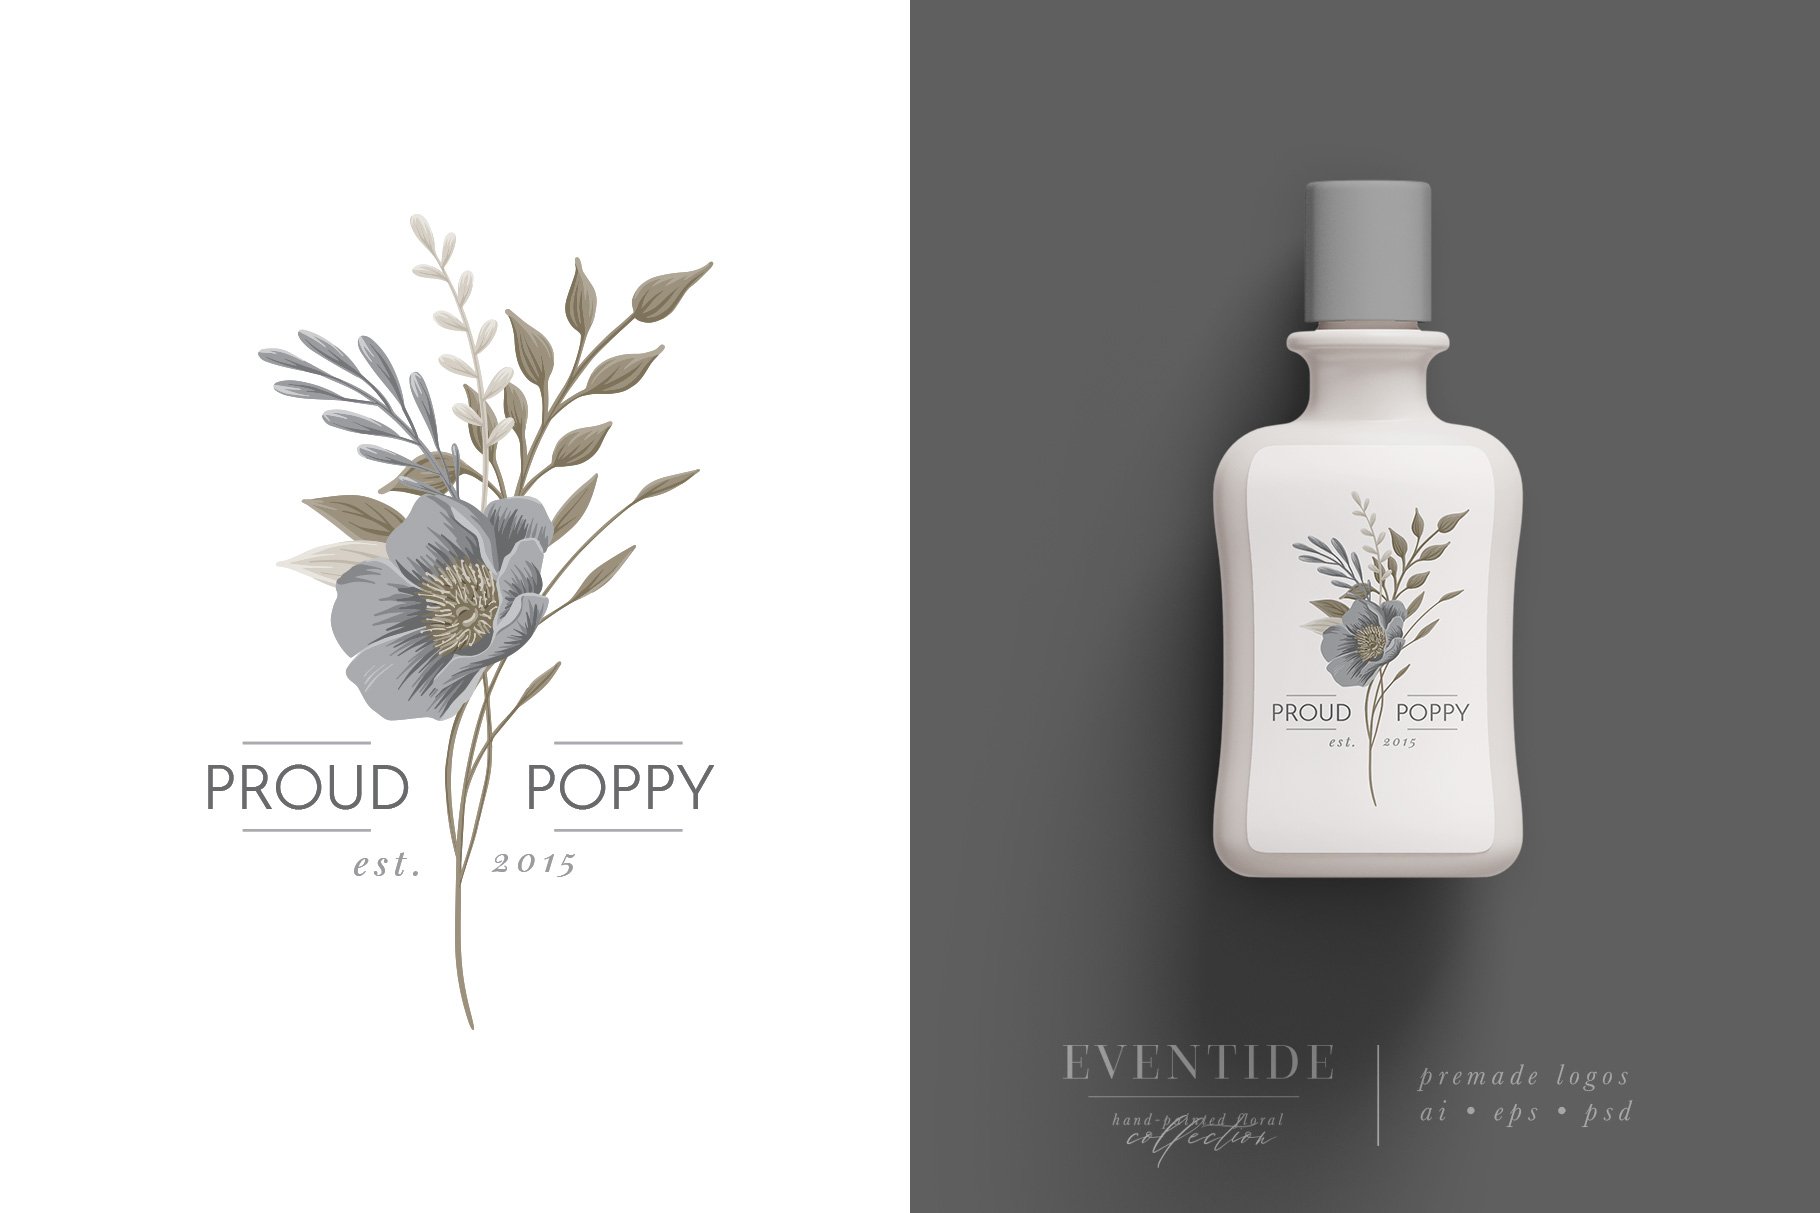 Eventide - Hand-painted Floral Collection